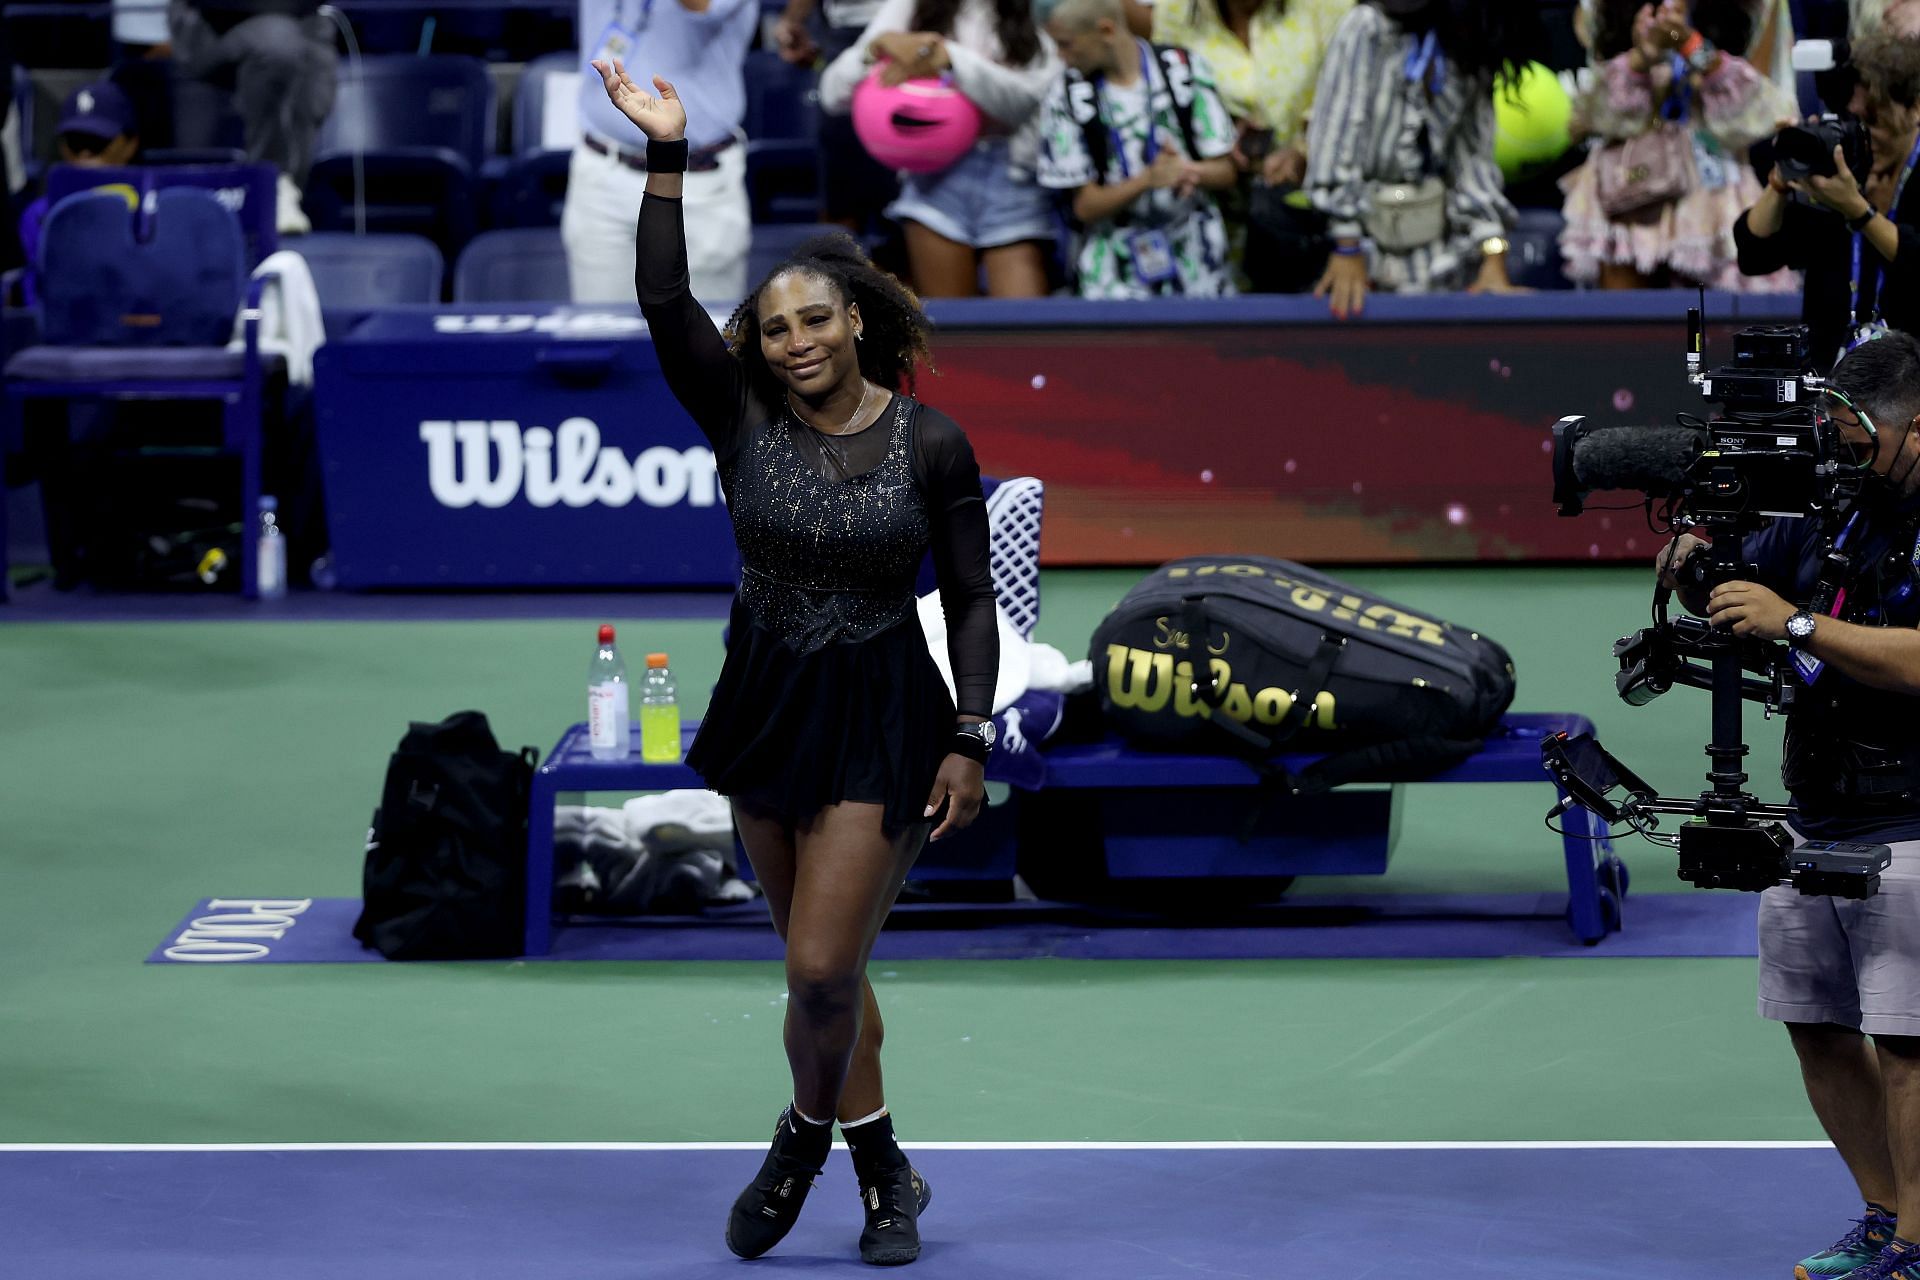 Serena Williams waves goodbye to the crowd after her exit from the 2022 US Open